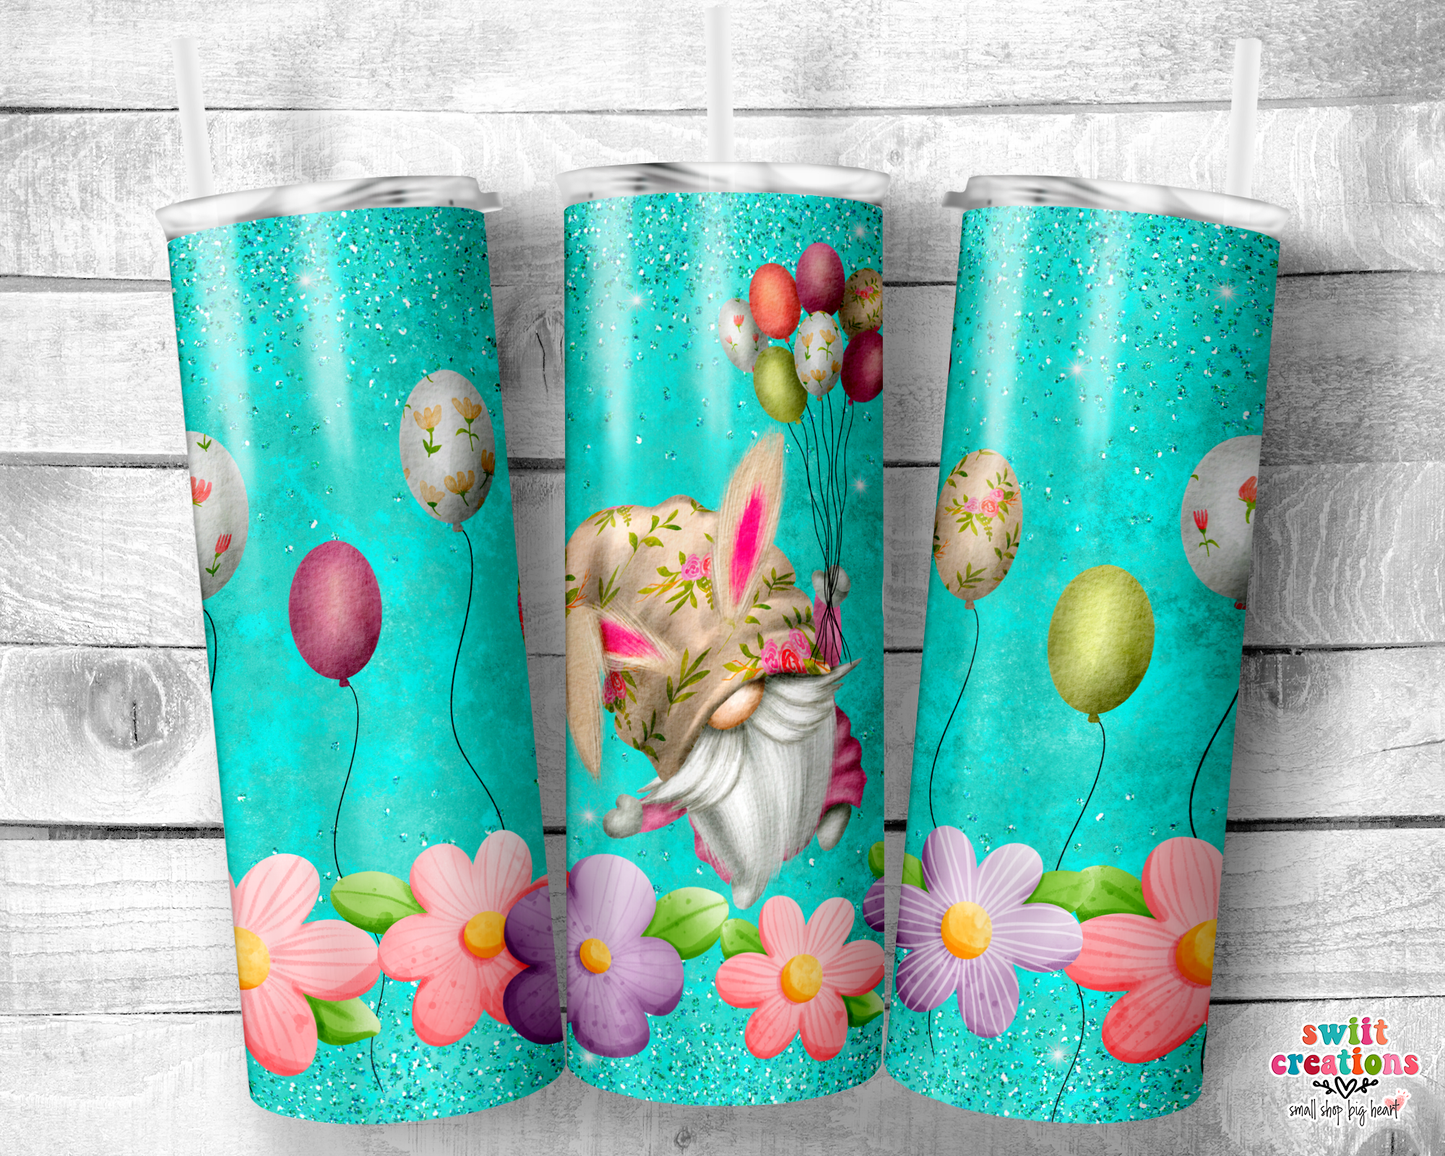 Bunny Gnome with Balloons Tumbler (T152)